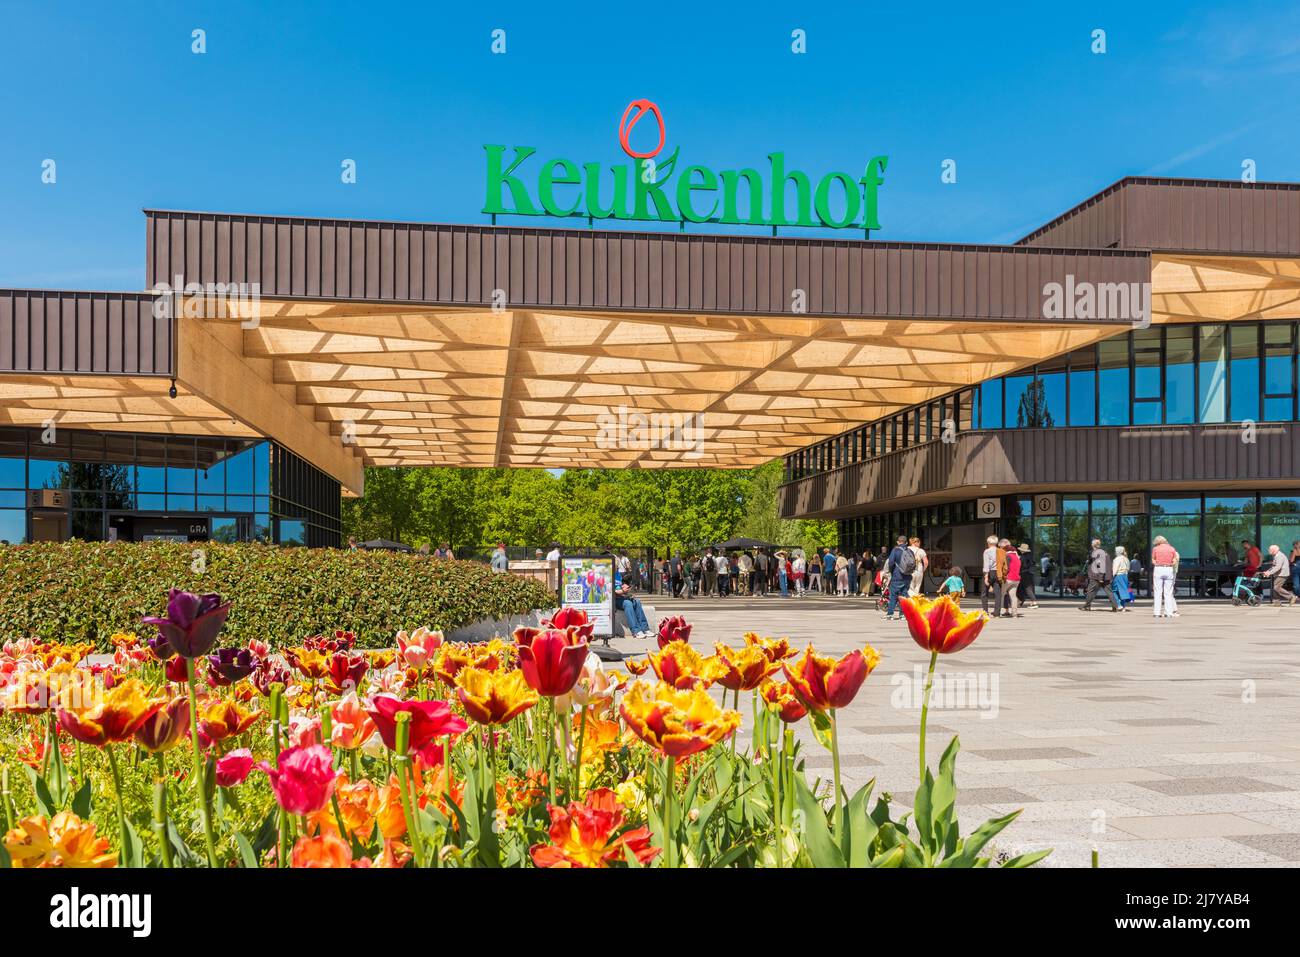 Entrance to the Keukenhof Gardens complex in Lisse, South Holland, The Netherlands. Keukenhof is one of the world's largest flower gardens. Stock Photo